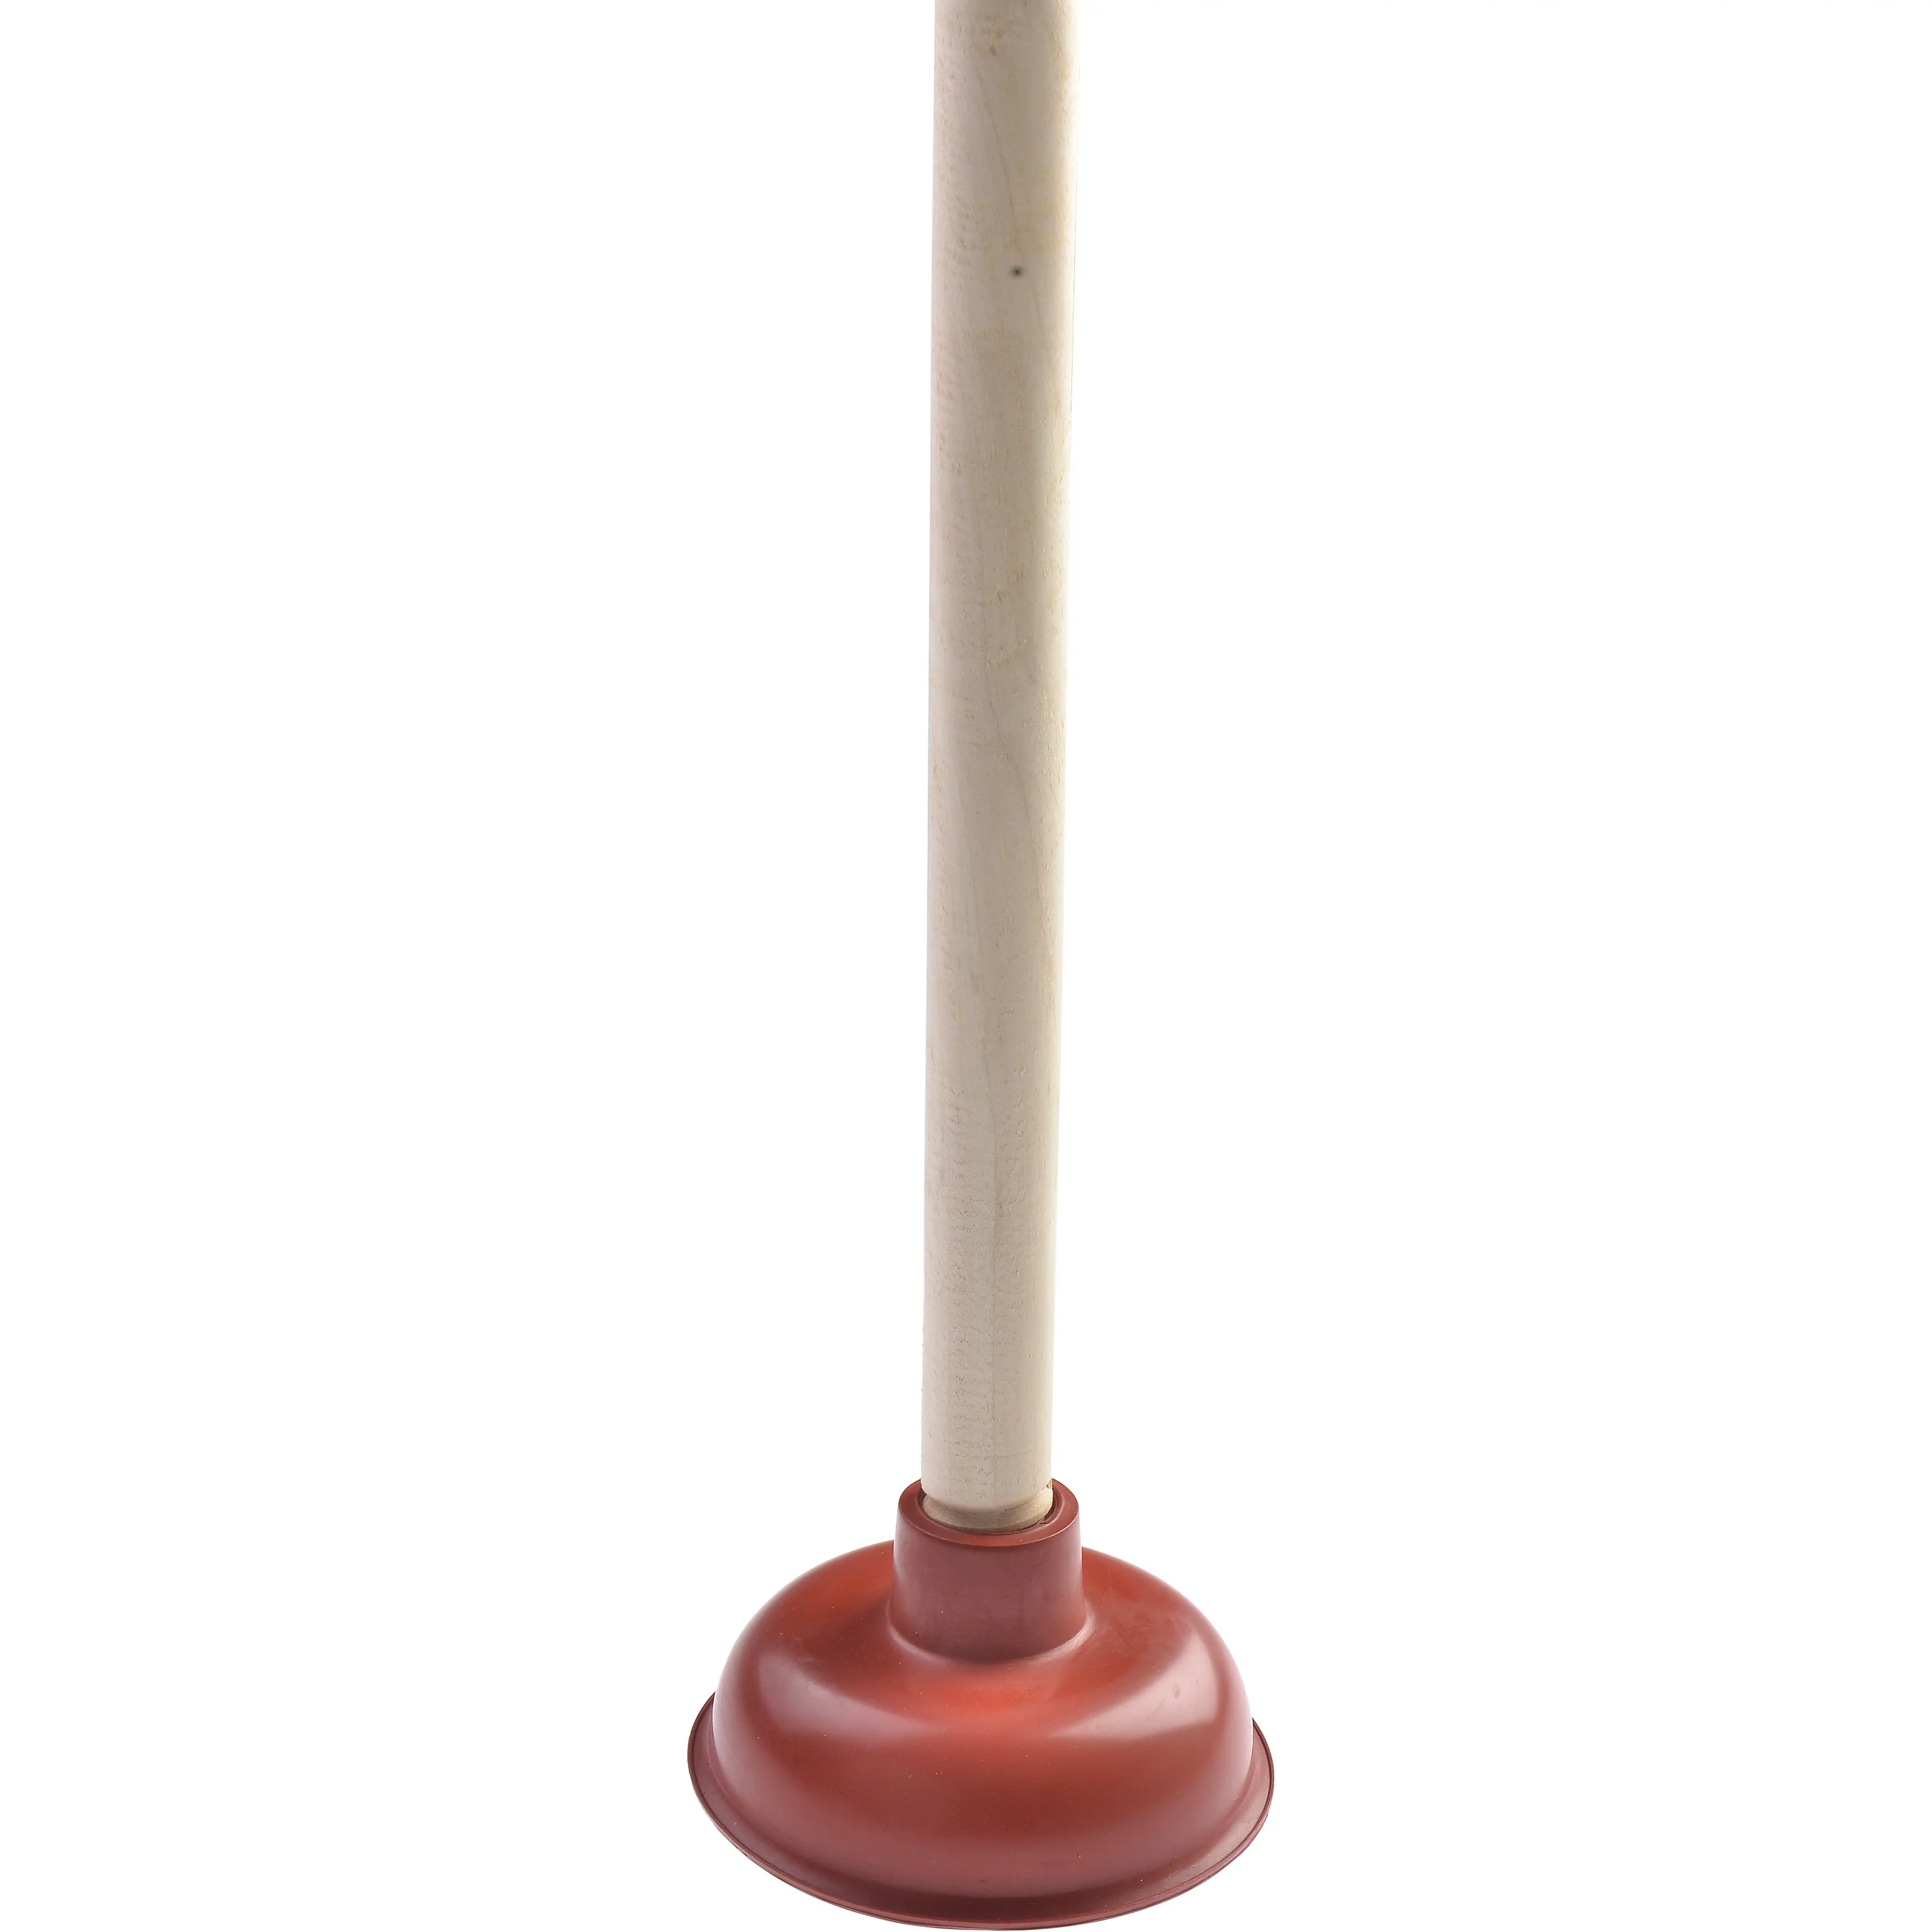 Supply Heavy Duty Force Cup Rubber Toilet Plunger with a Long Wooden Handle to Fix Clogged Toilets and Drains